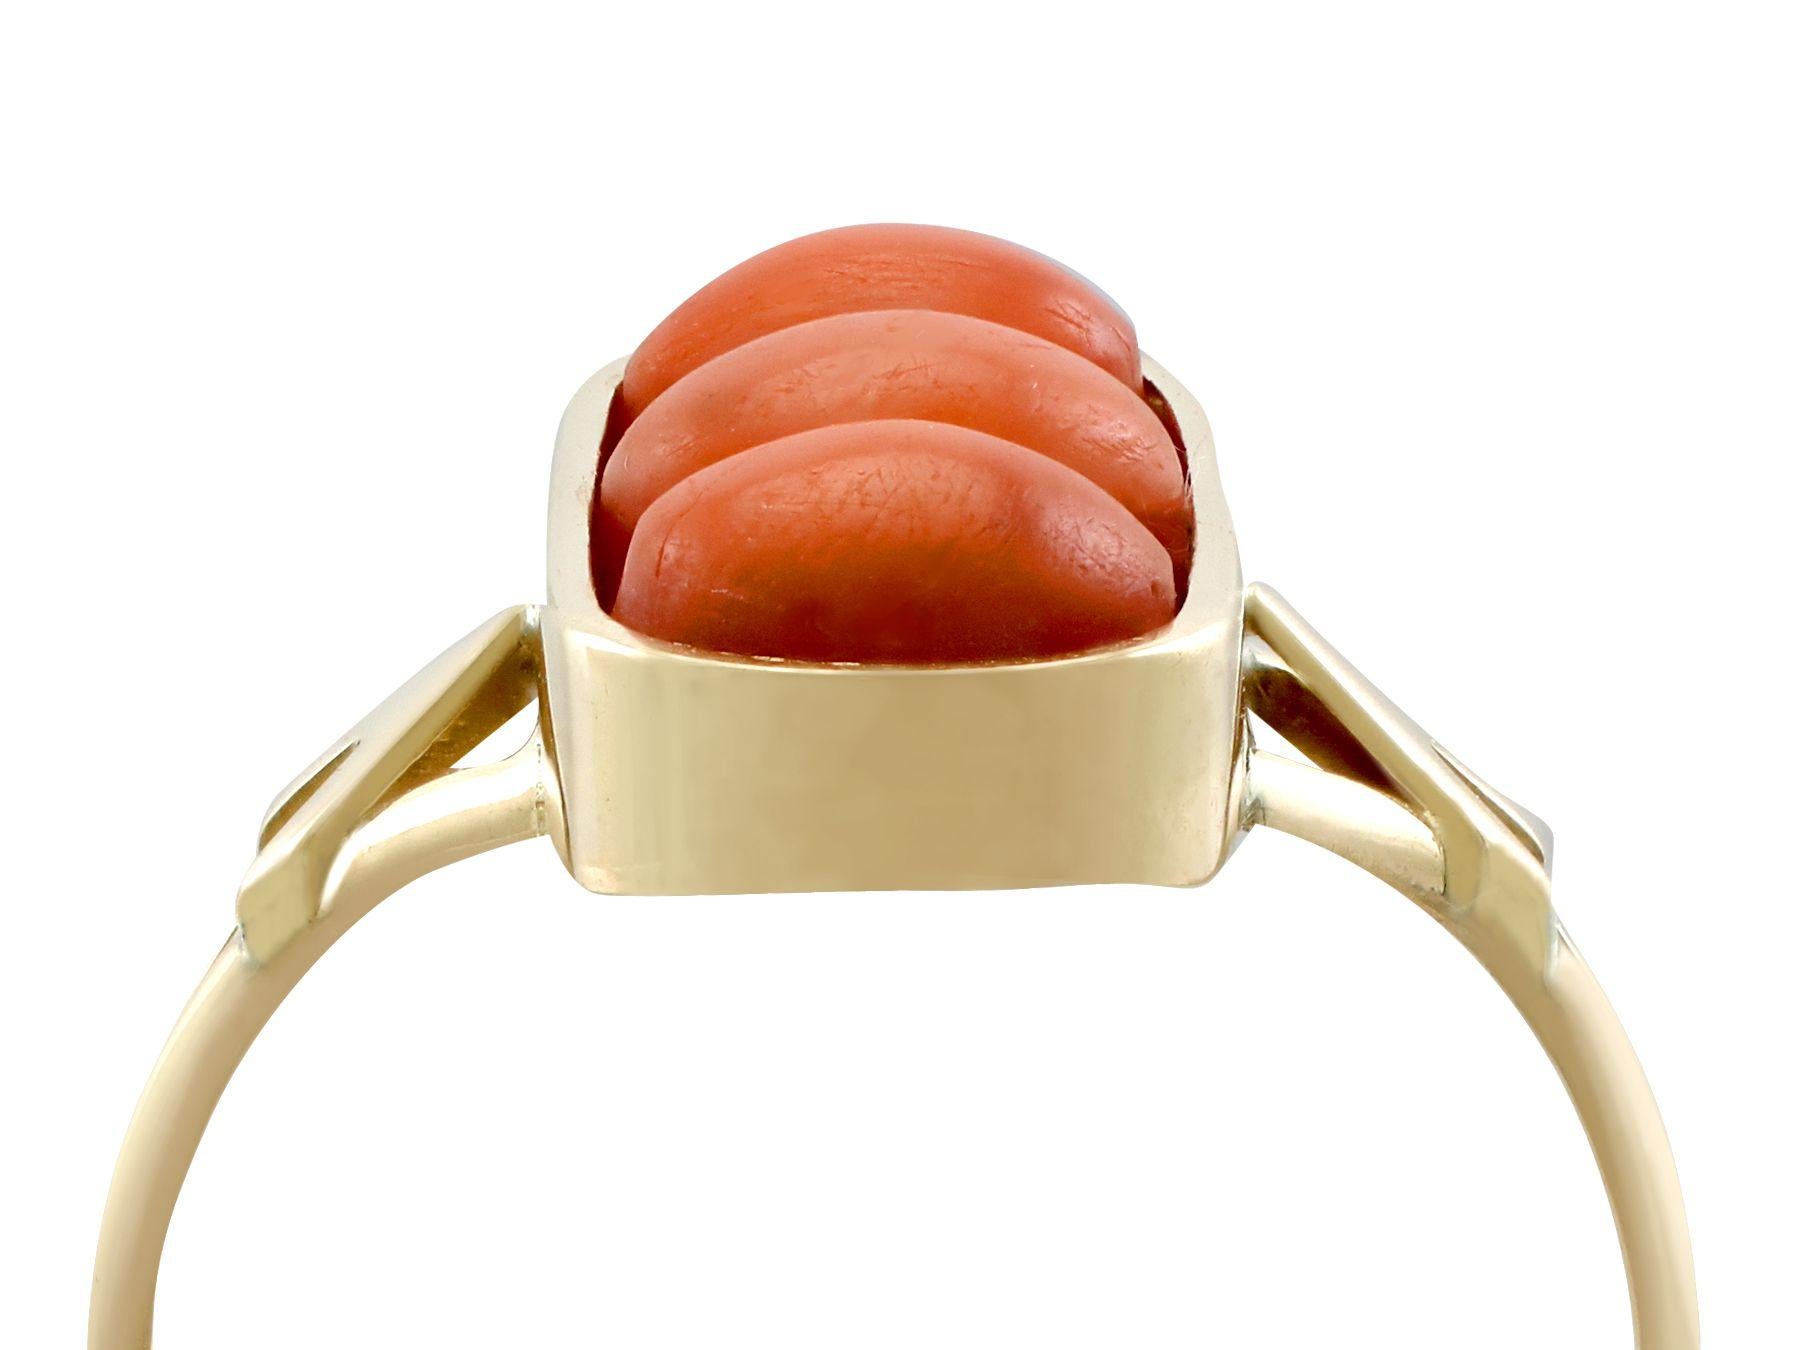 An impressive antique 1920s 3.60 carat coral and 14 karat yellow gold dress ring; part of our diverse antique jewelry and estate jewelry collections.

This fine and impressive gemstone ring has been crafted in 14k yellow gold.

The oval shaped frame